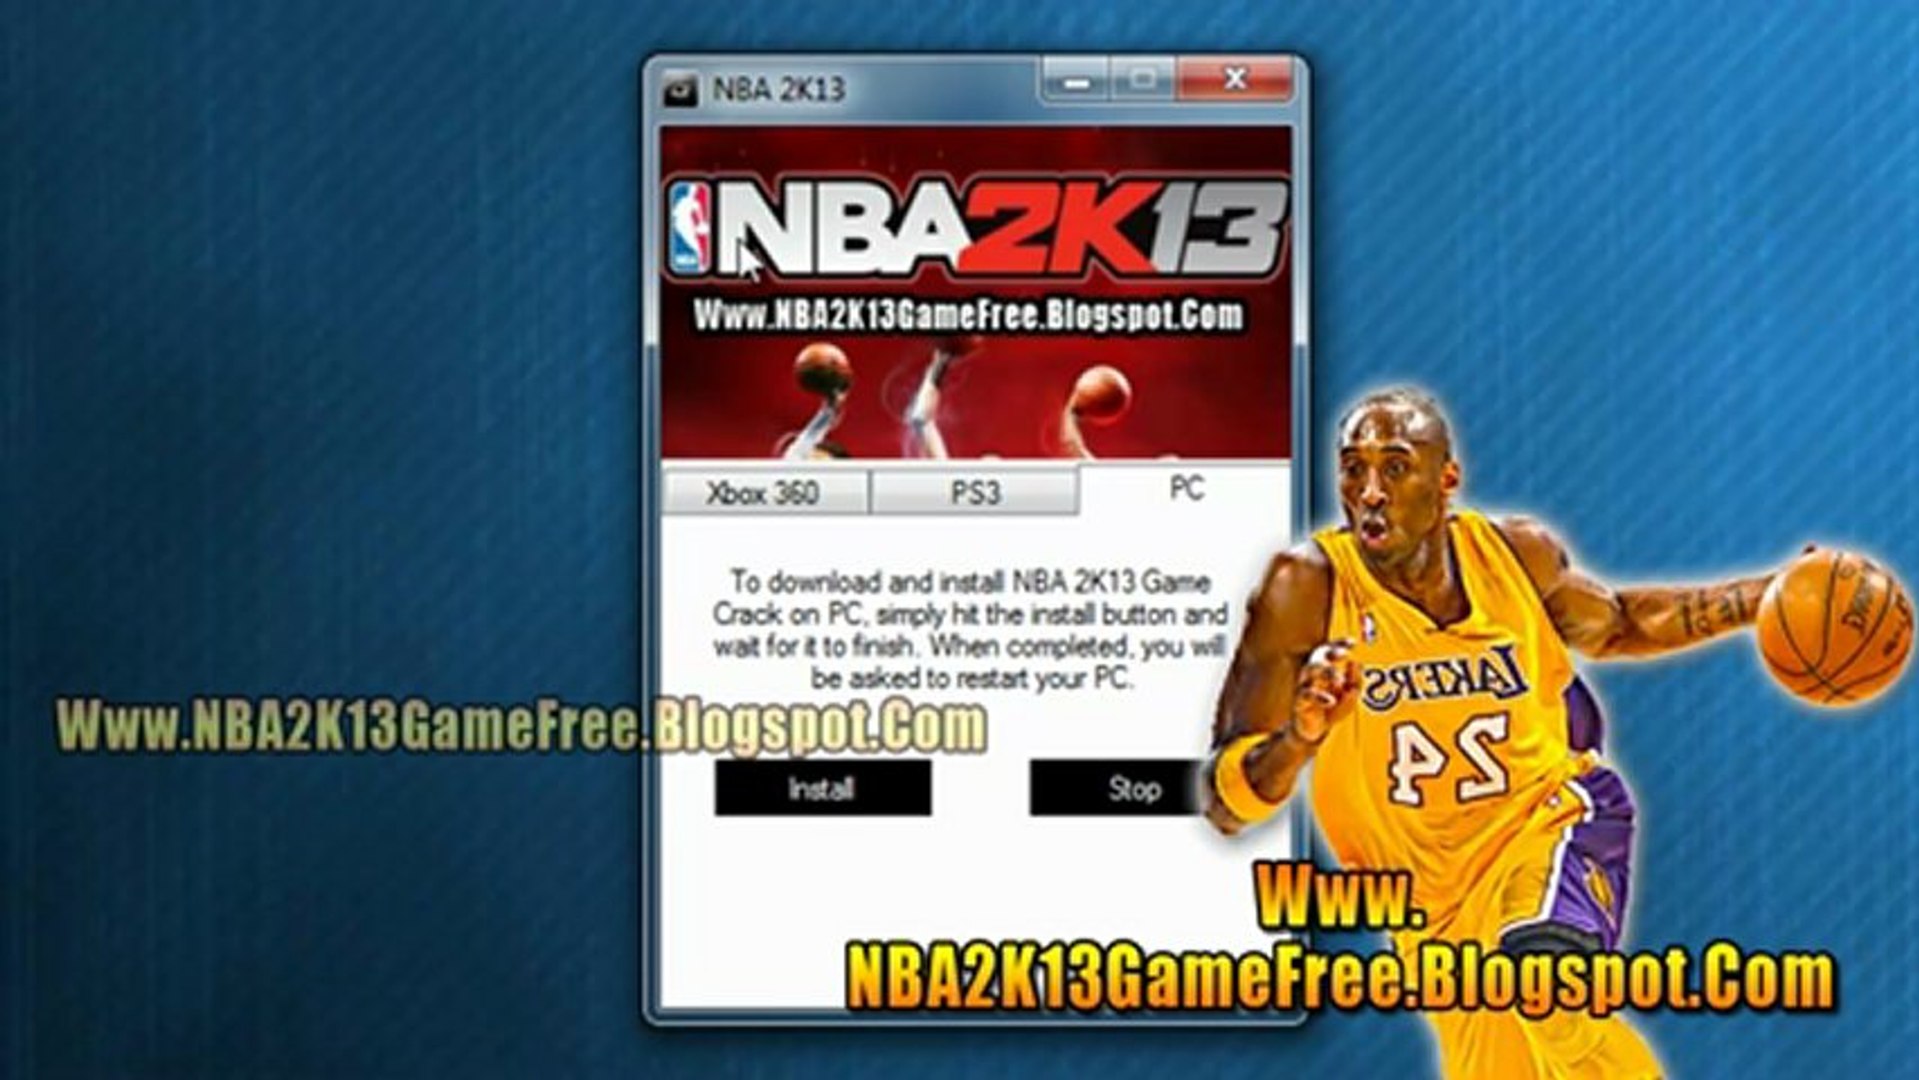 How to Download NBA 2K13 Game Crack For Free - Tutorial - video Dailymotion